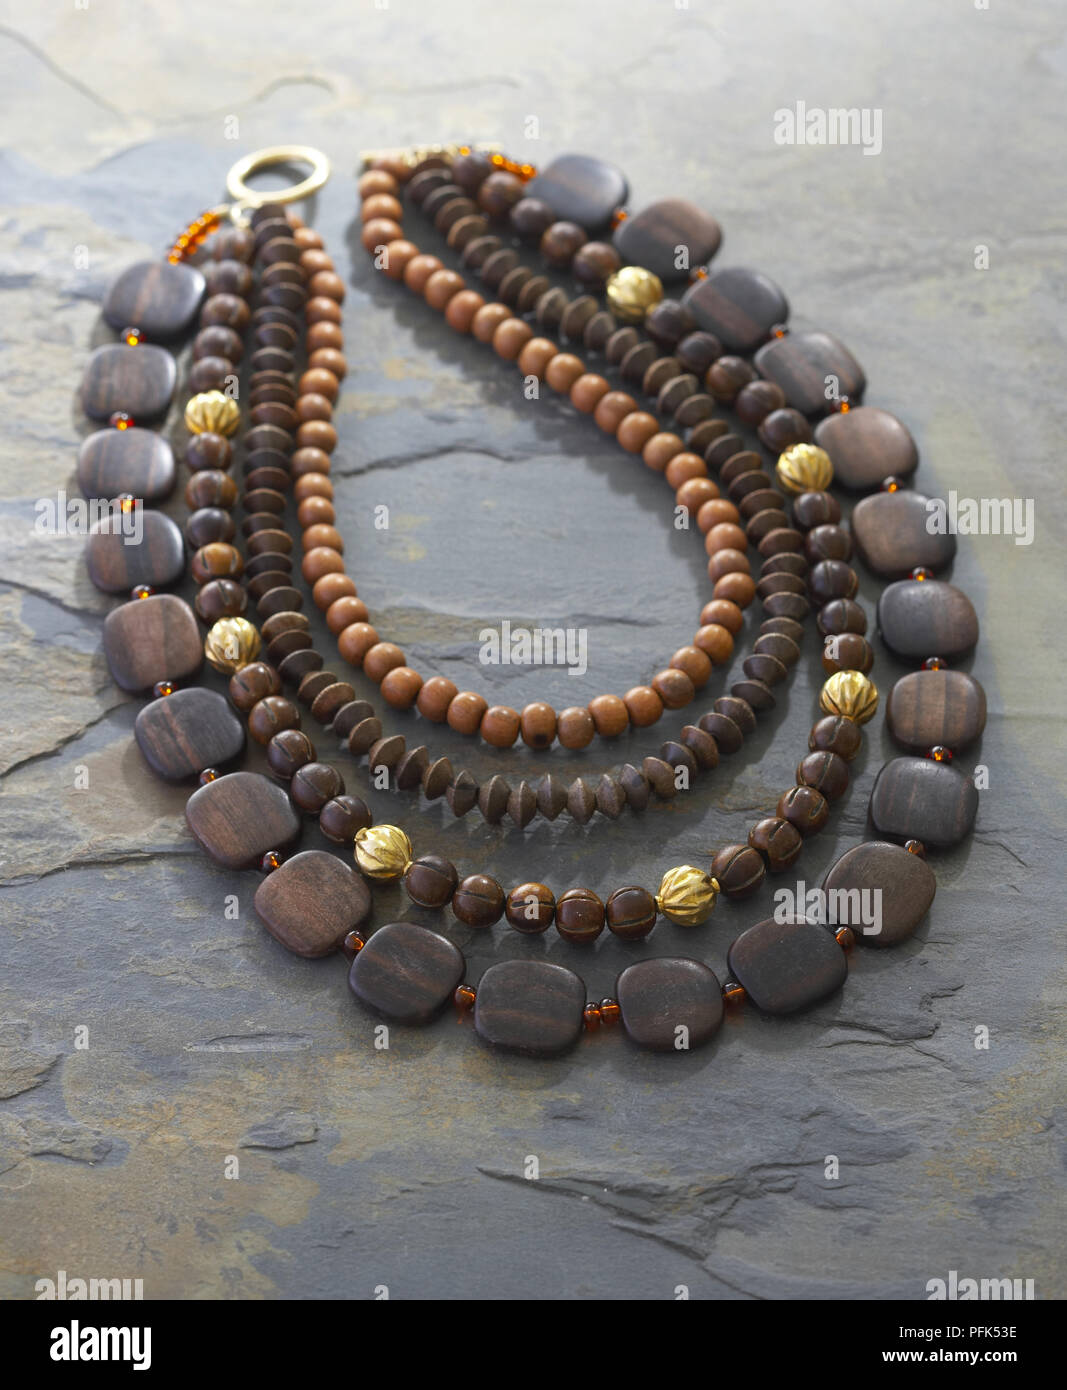 Hemp Necklace With Wooden Beads | sunnybeachjewelry-tuongthan.vn